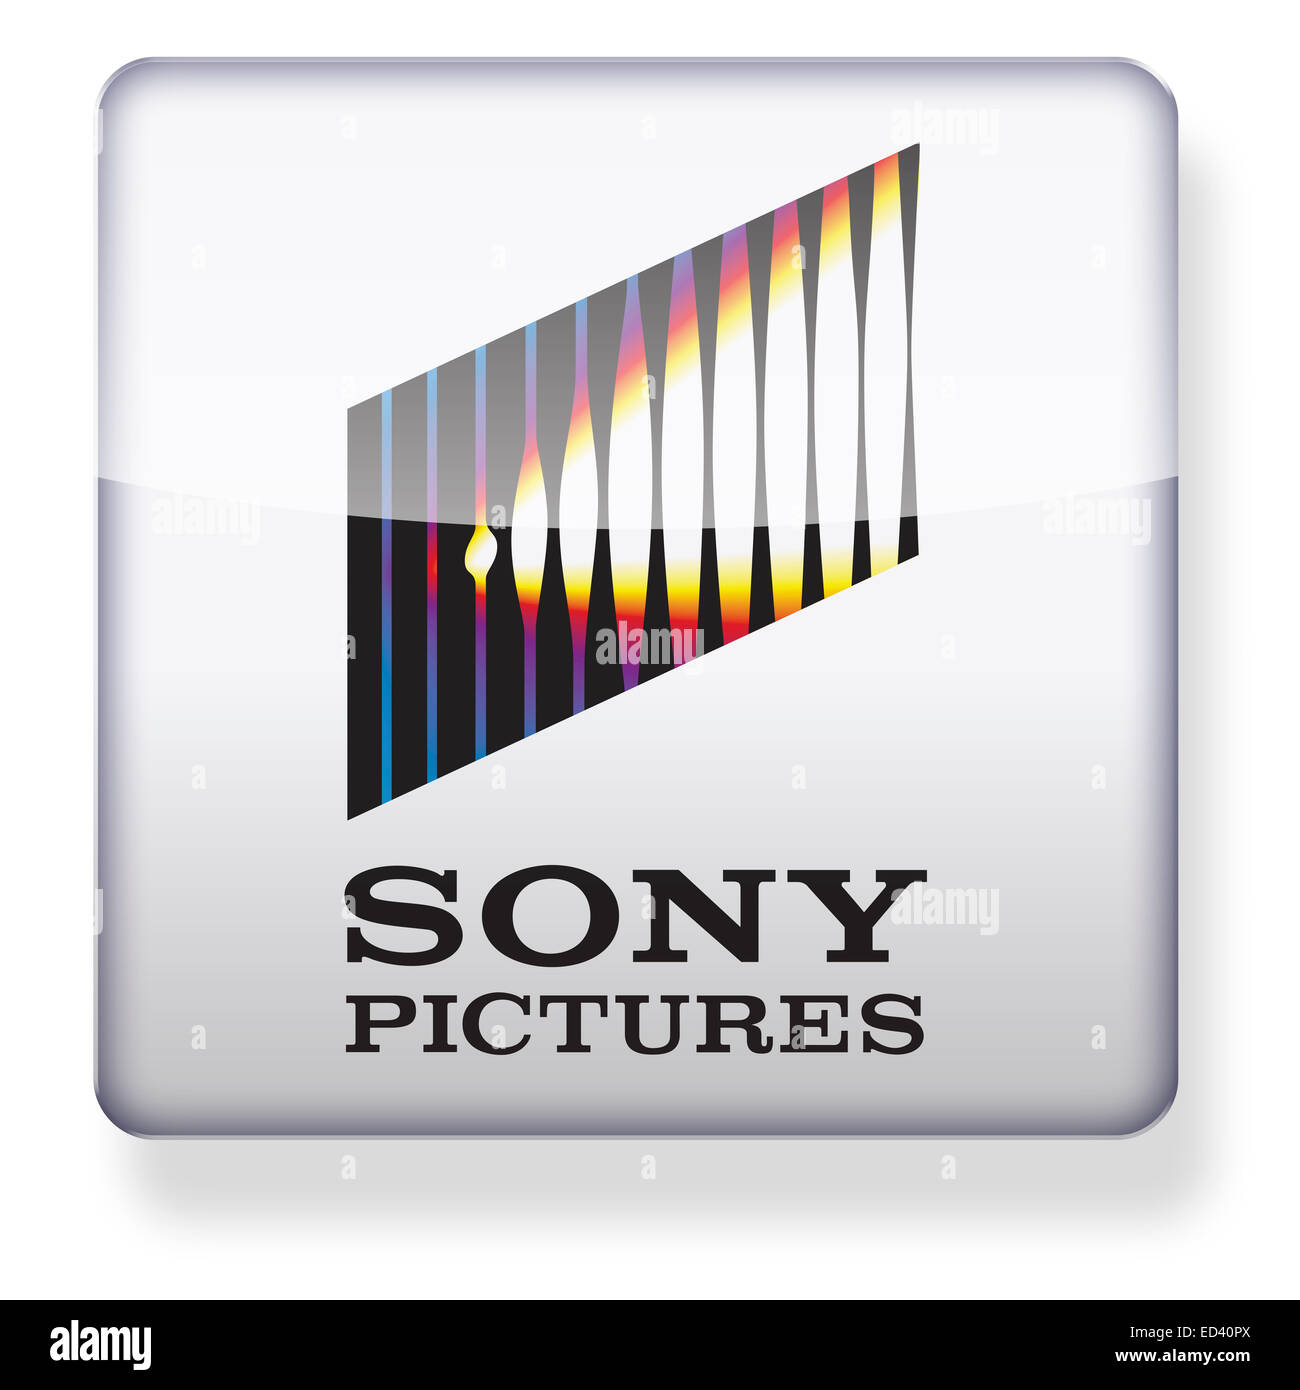 Sony Pictures logo as an app icon. Clipping path included. Stock Photo